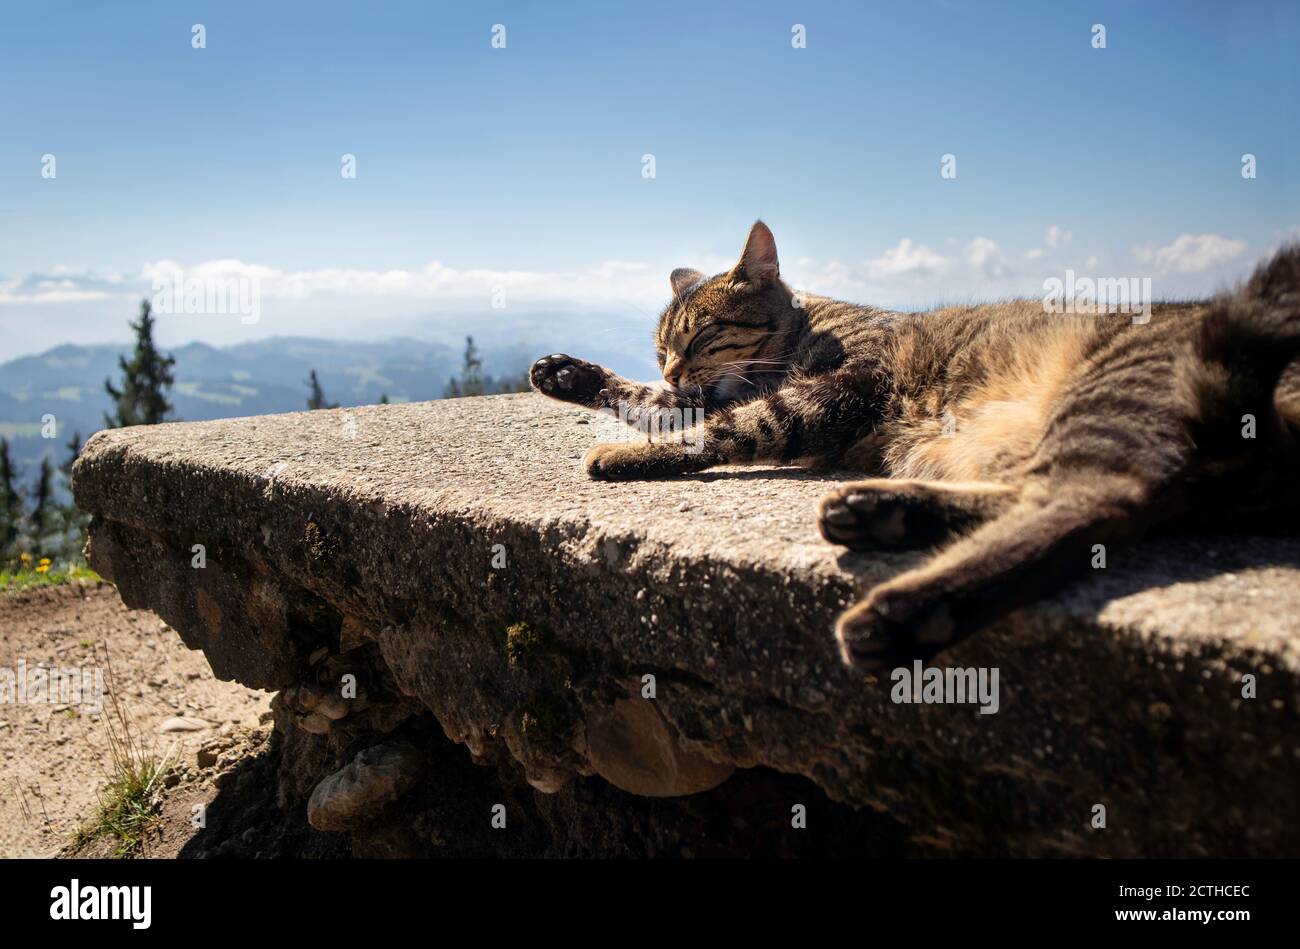 Adult tabby cat licking paws. Cat is stretched out on stone bench in front of scenic mountain background and blue sky with clouds. Napf, Switzerland. Stock Photo